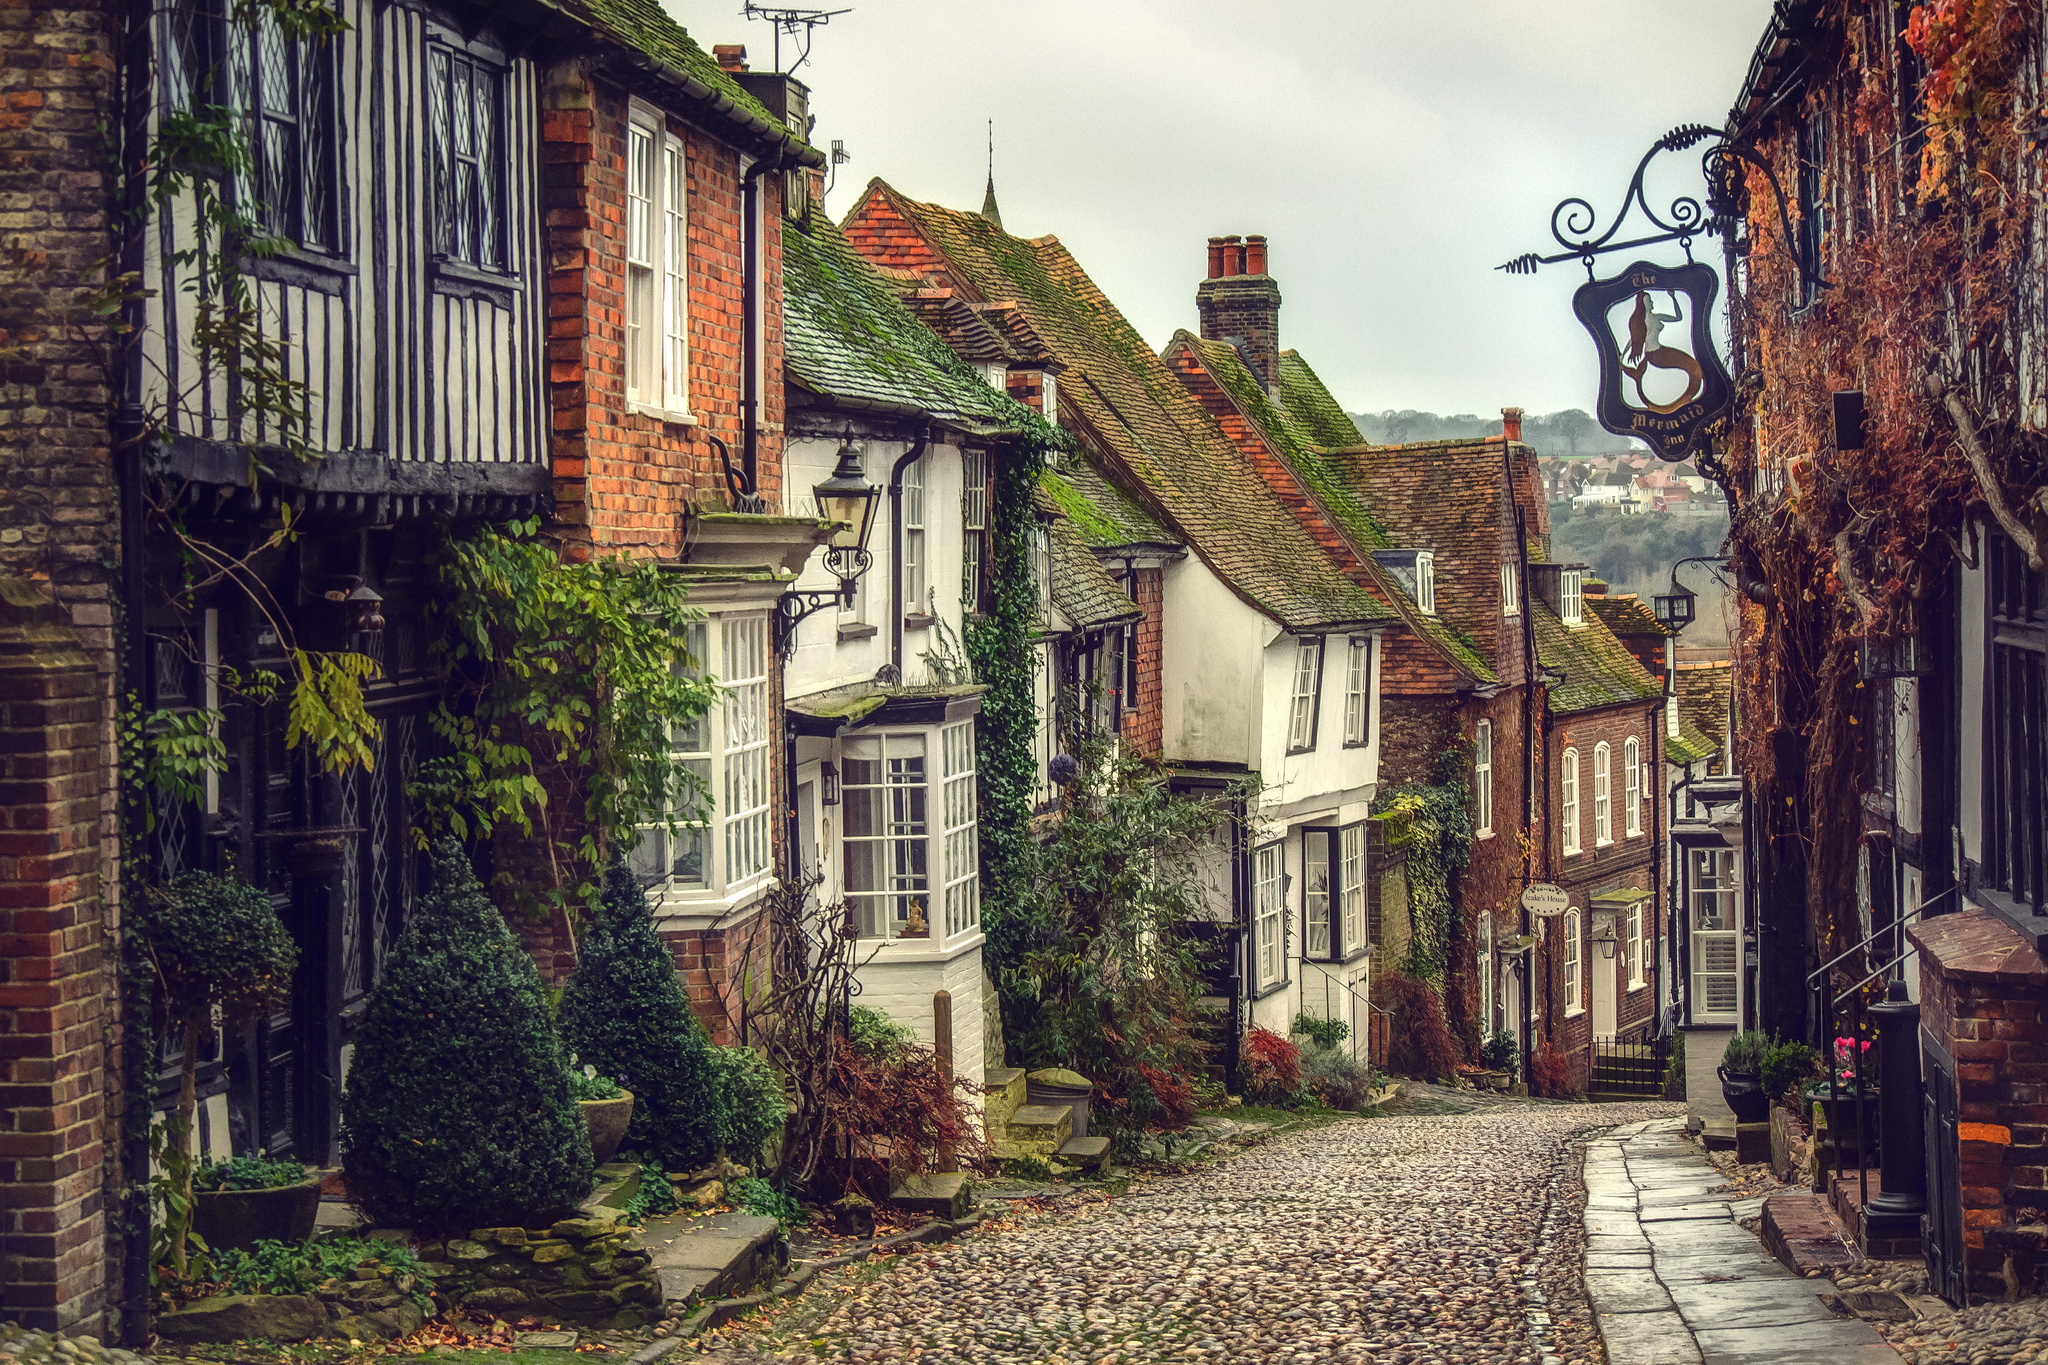 Alley: Mermaid Street in Rye, Historic town in East Sussex, England, Medieval architecture. 2050x1370 HD Wallpaper.